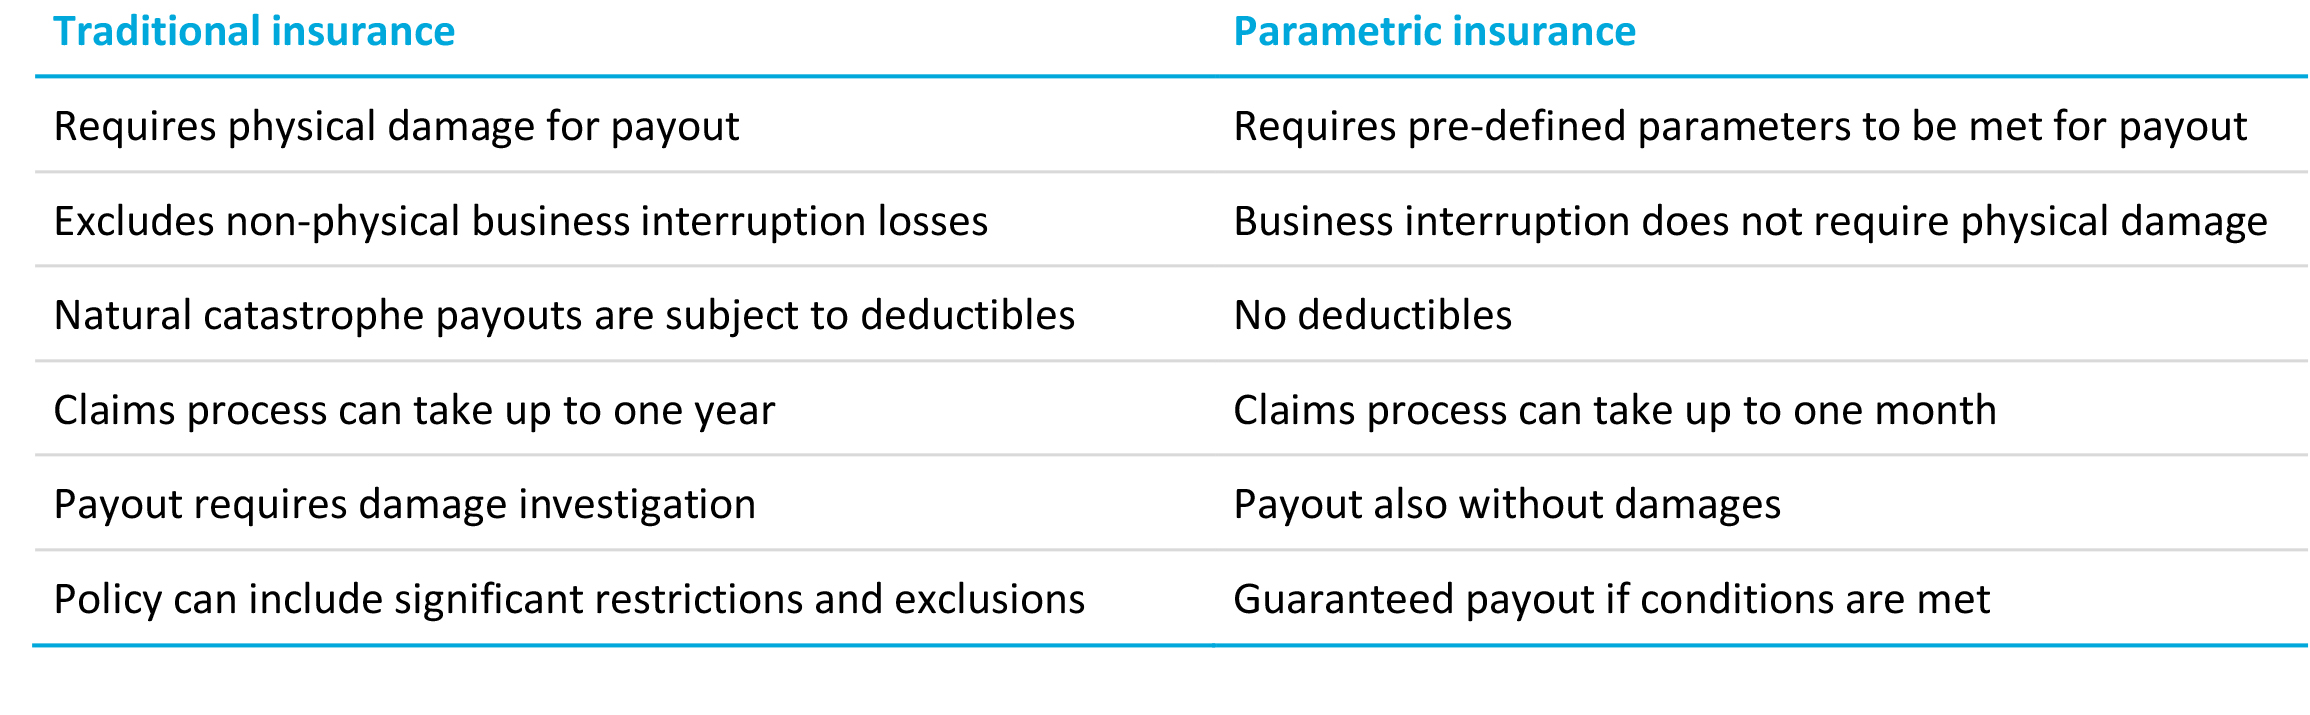 Comparison between parametric and traditional insurance 